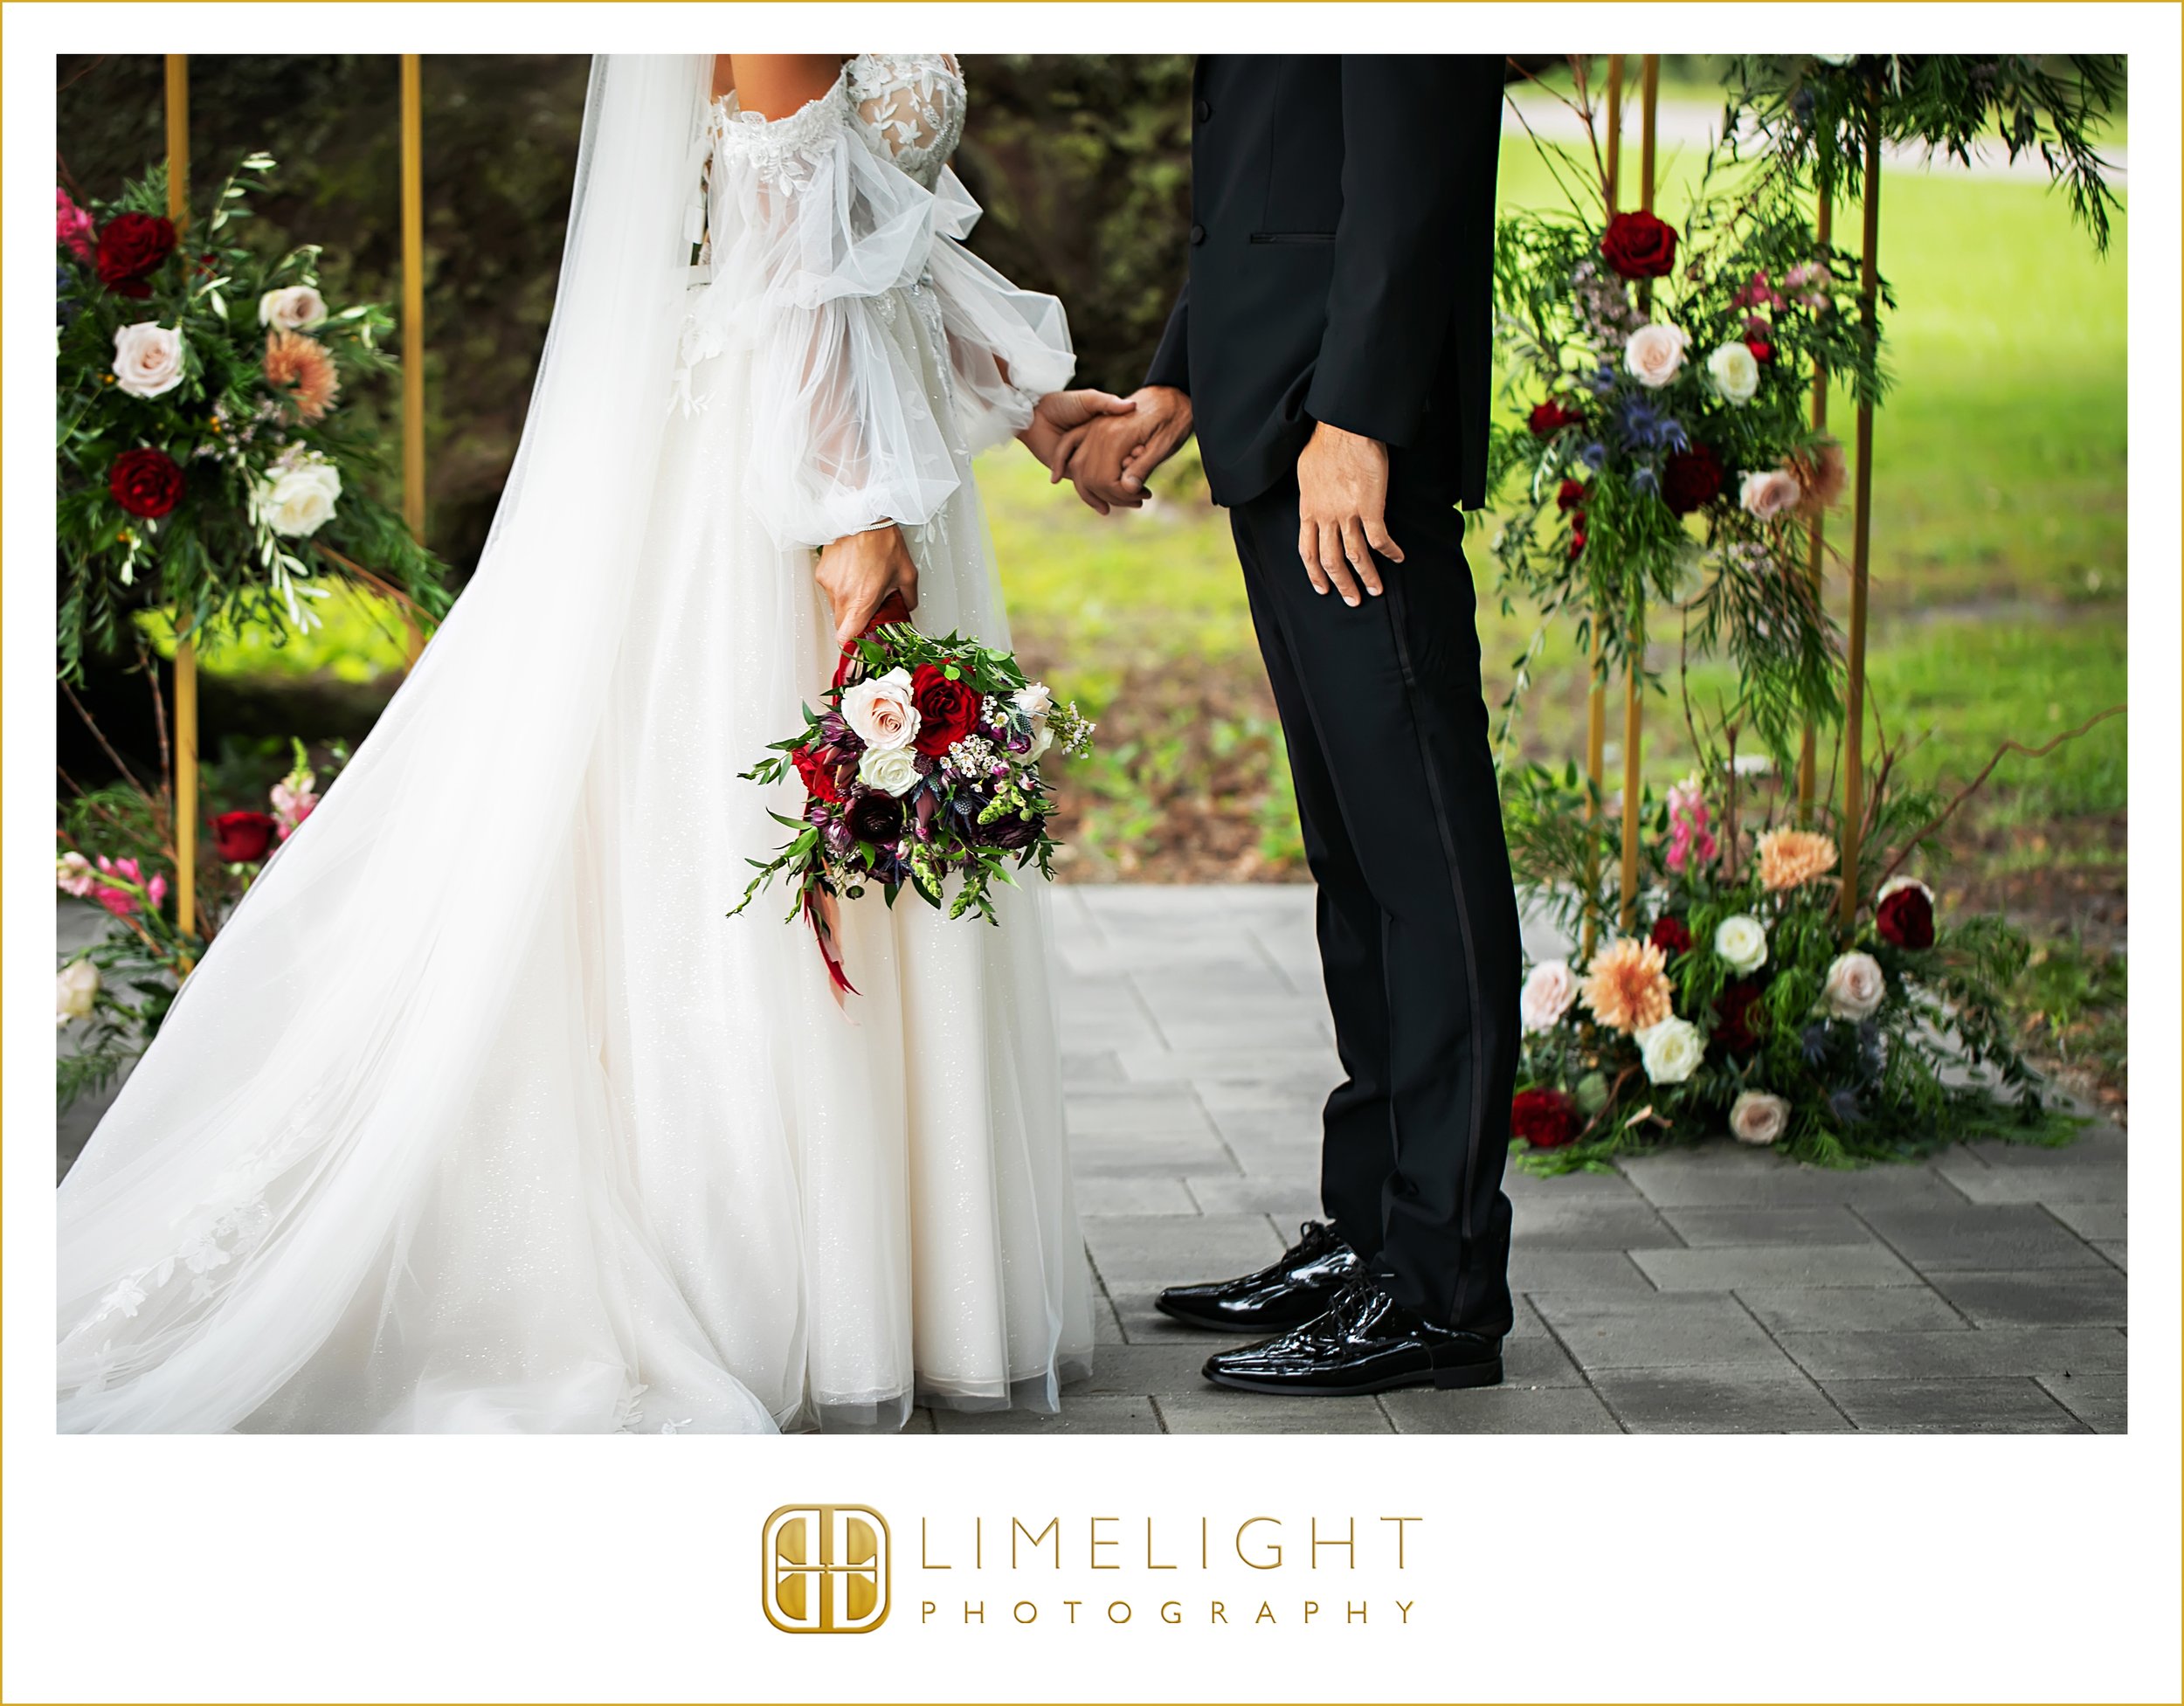 0019-wedding-photography-packages-legacy-lanes-brooksville-fl.jpg